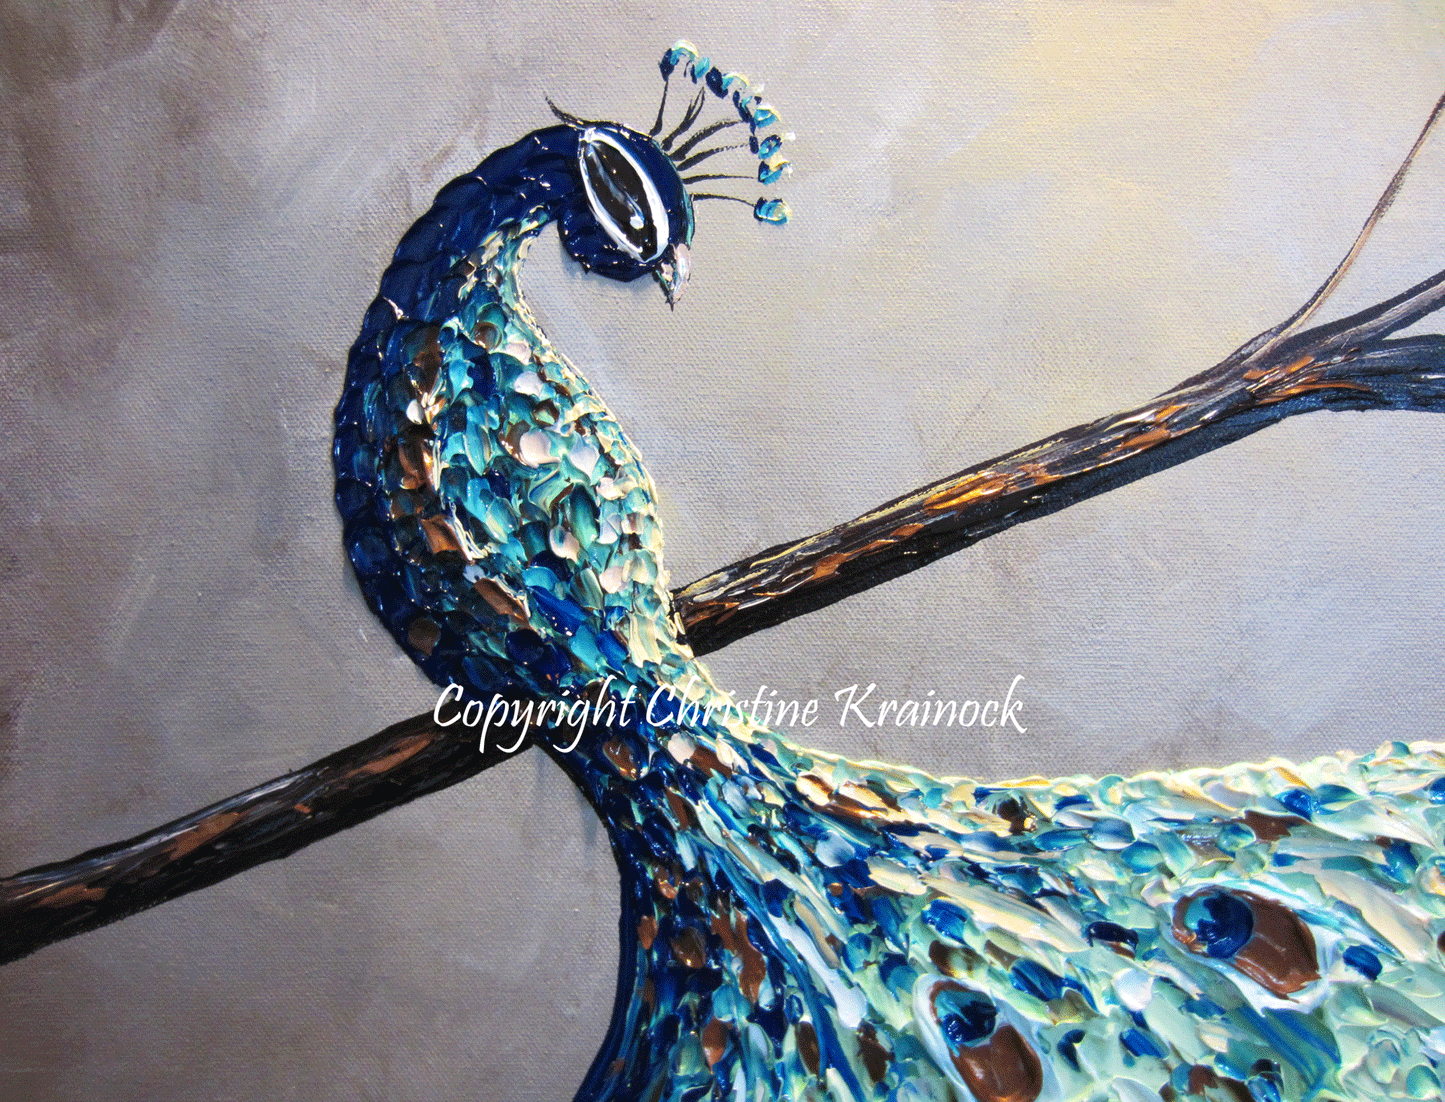 Load image into Gallery viewer, GICLEE PRINT Art Abstract Peacock Painting Modern Canvas Prints Blue Green Grey Brown Gold Bird - Christine Krainock Art - Contemporary Art by Christine - 4
